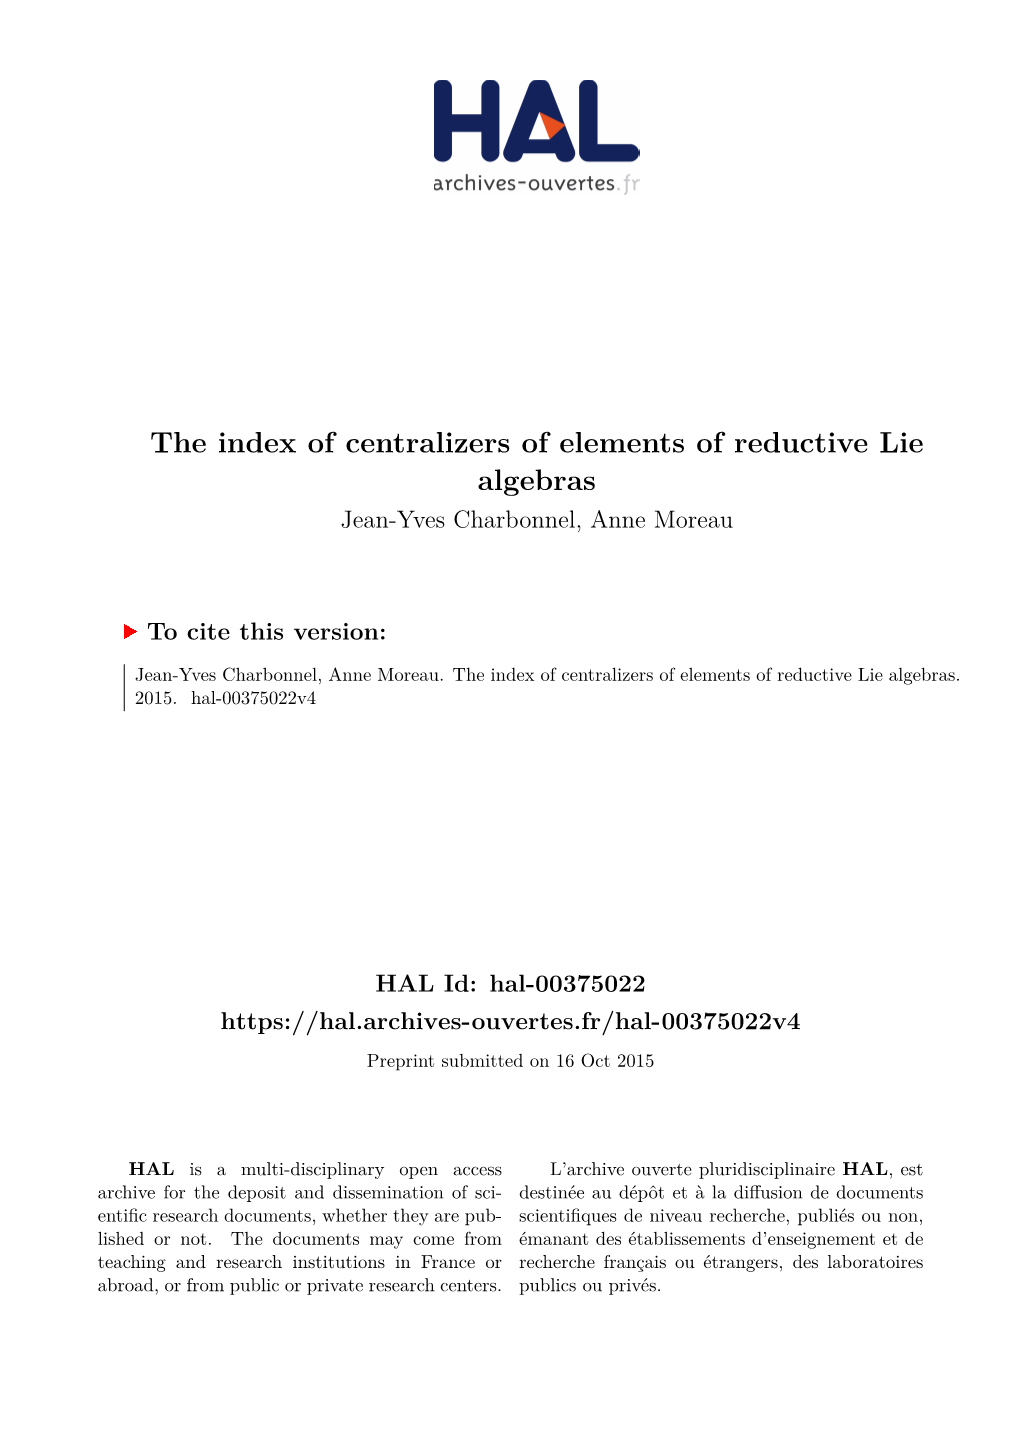 The Index of Centralizers of Elements of Reductive Lie Algebras Jean-Yves Charbonnel, Anne Moreau